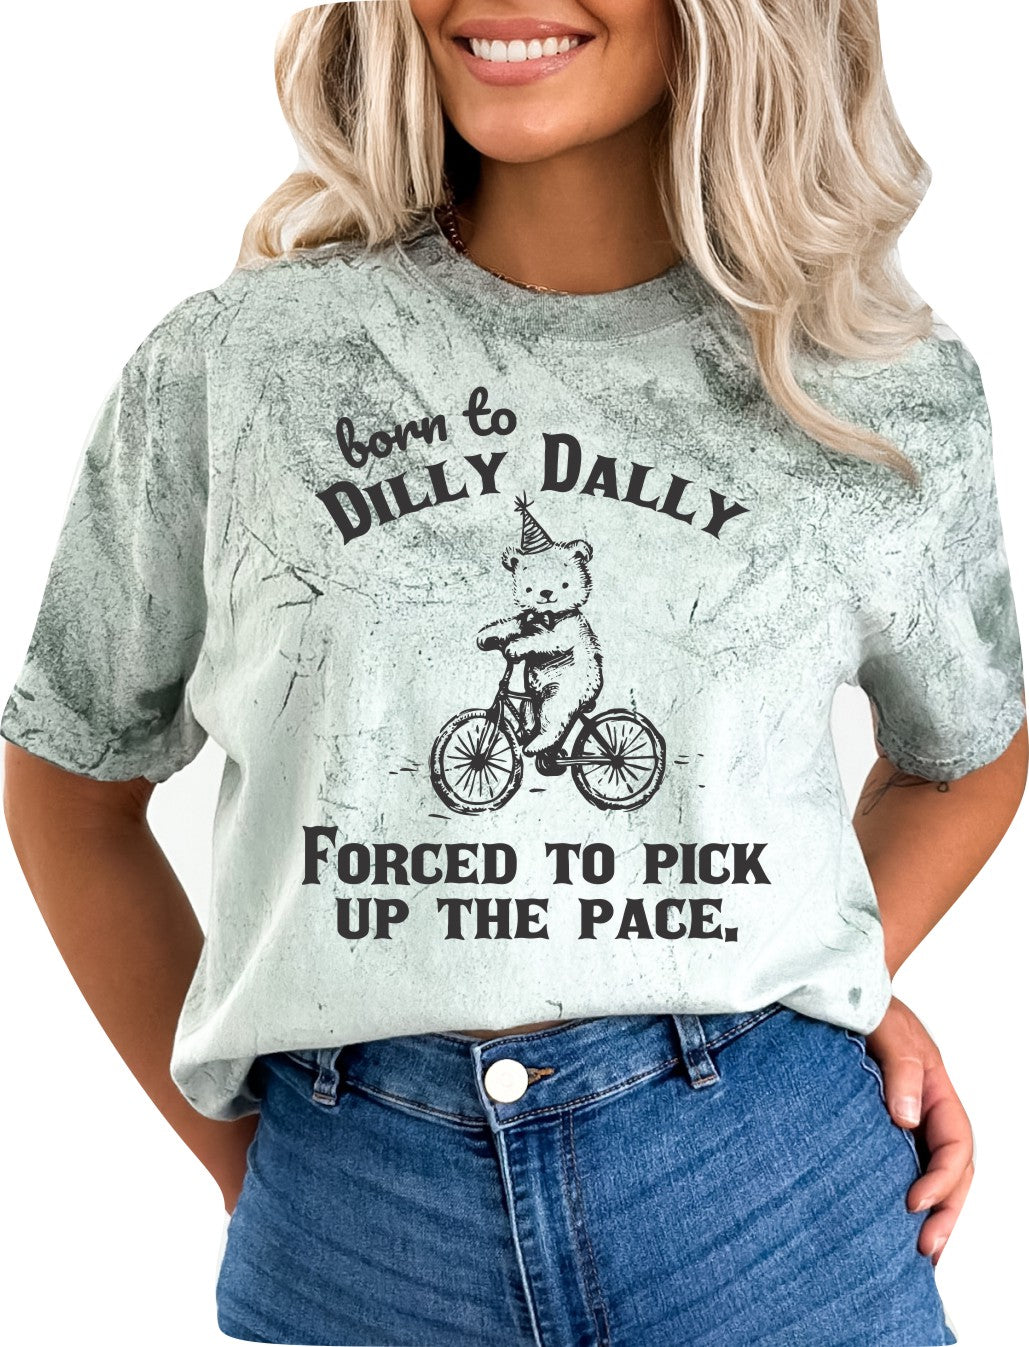 Born to Dilly Dally Forced to Pick up the Pace Graphic T-Shirt